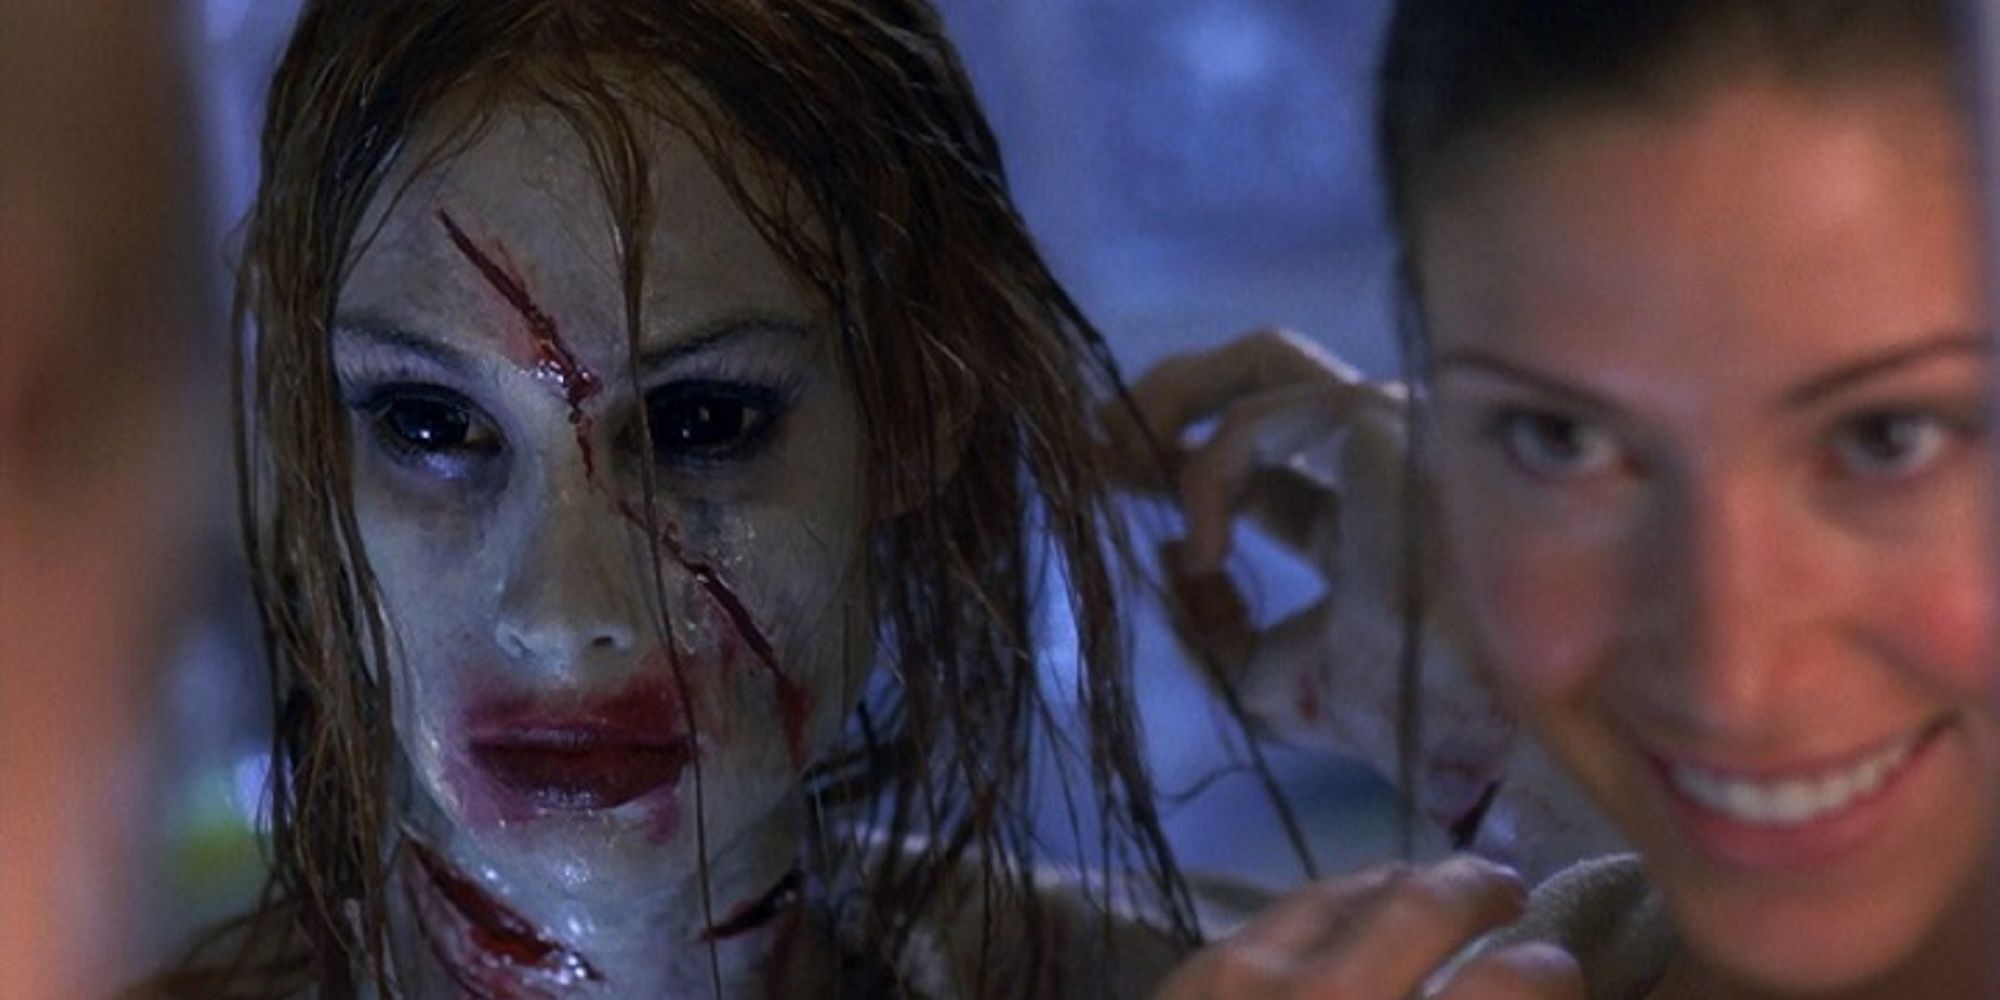 The Angry Princess in front of the mirror in Thirteen Ghosts.